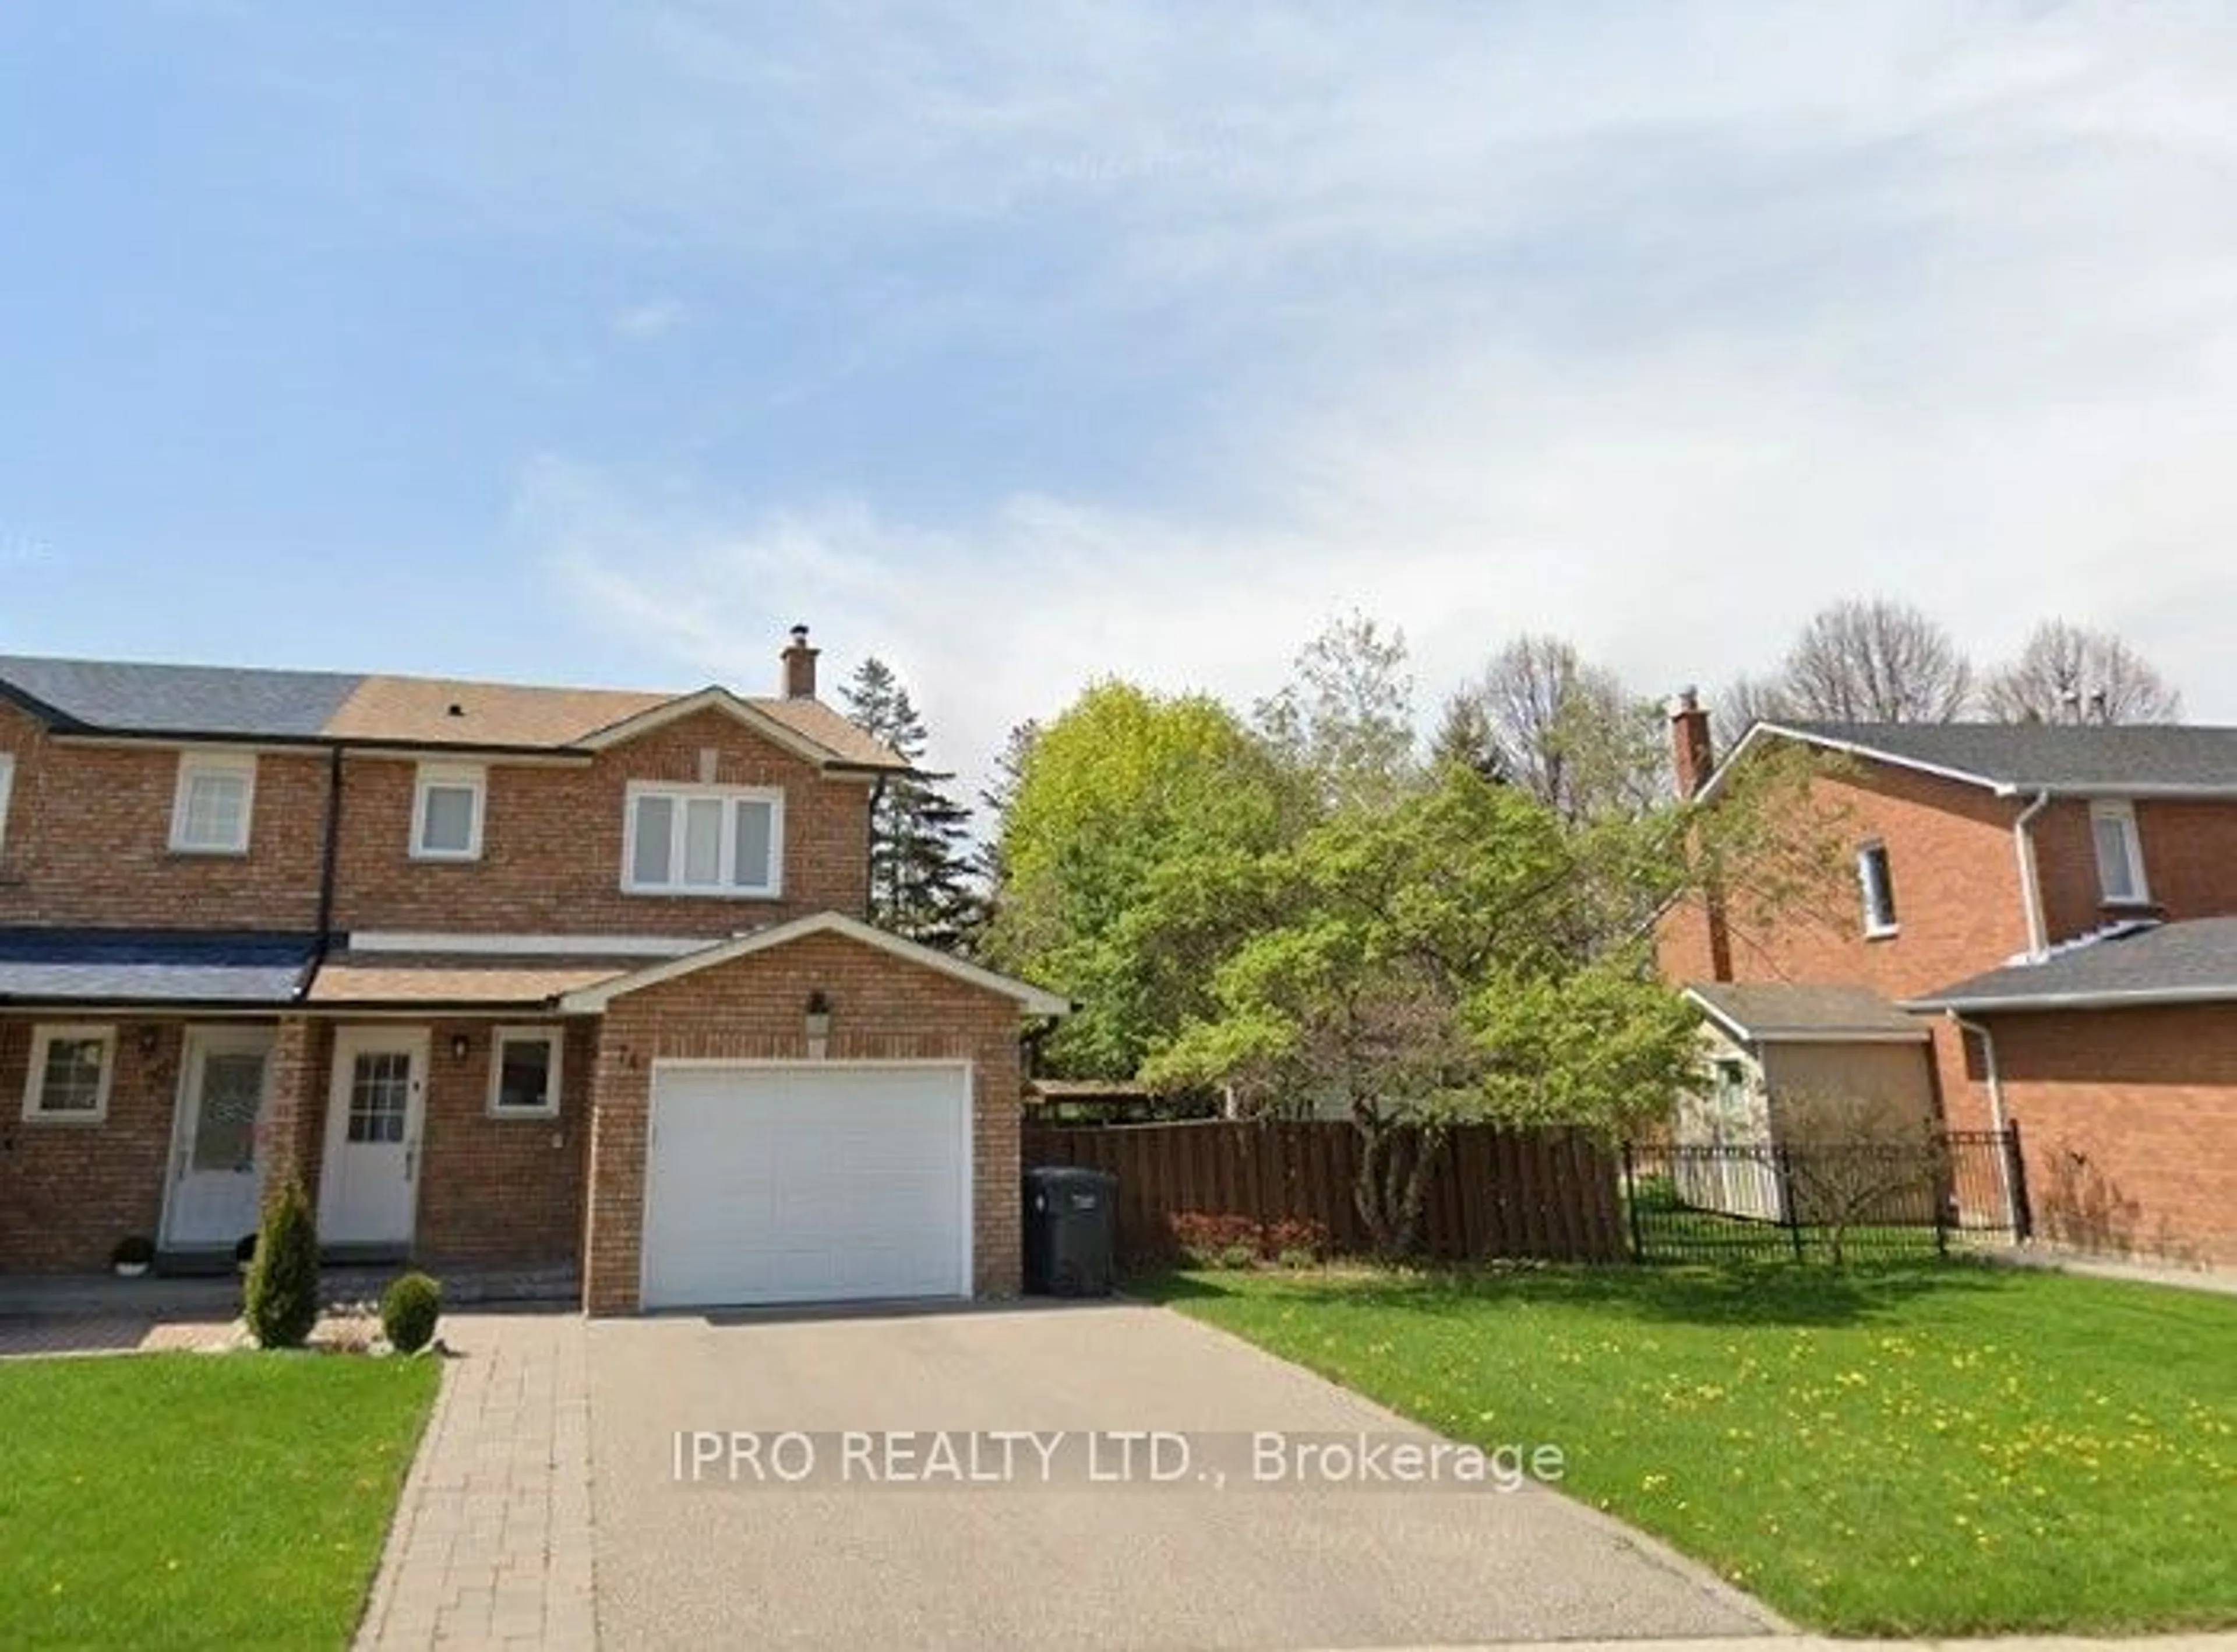 Frontside or backside of a home for 74 Dumfries Ave, Brampton Ontario L6Z 2X8